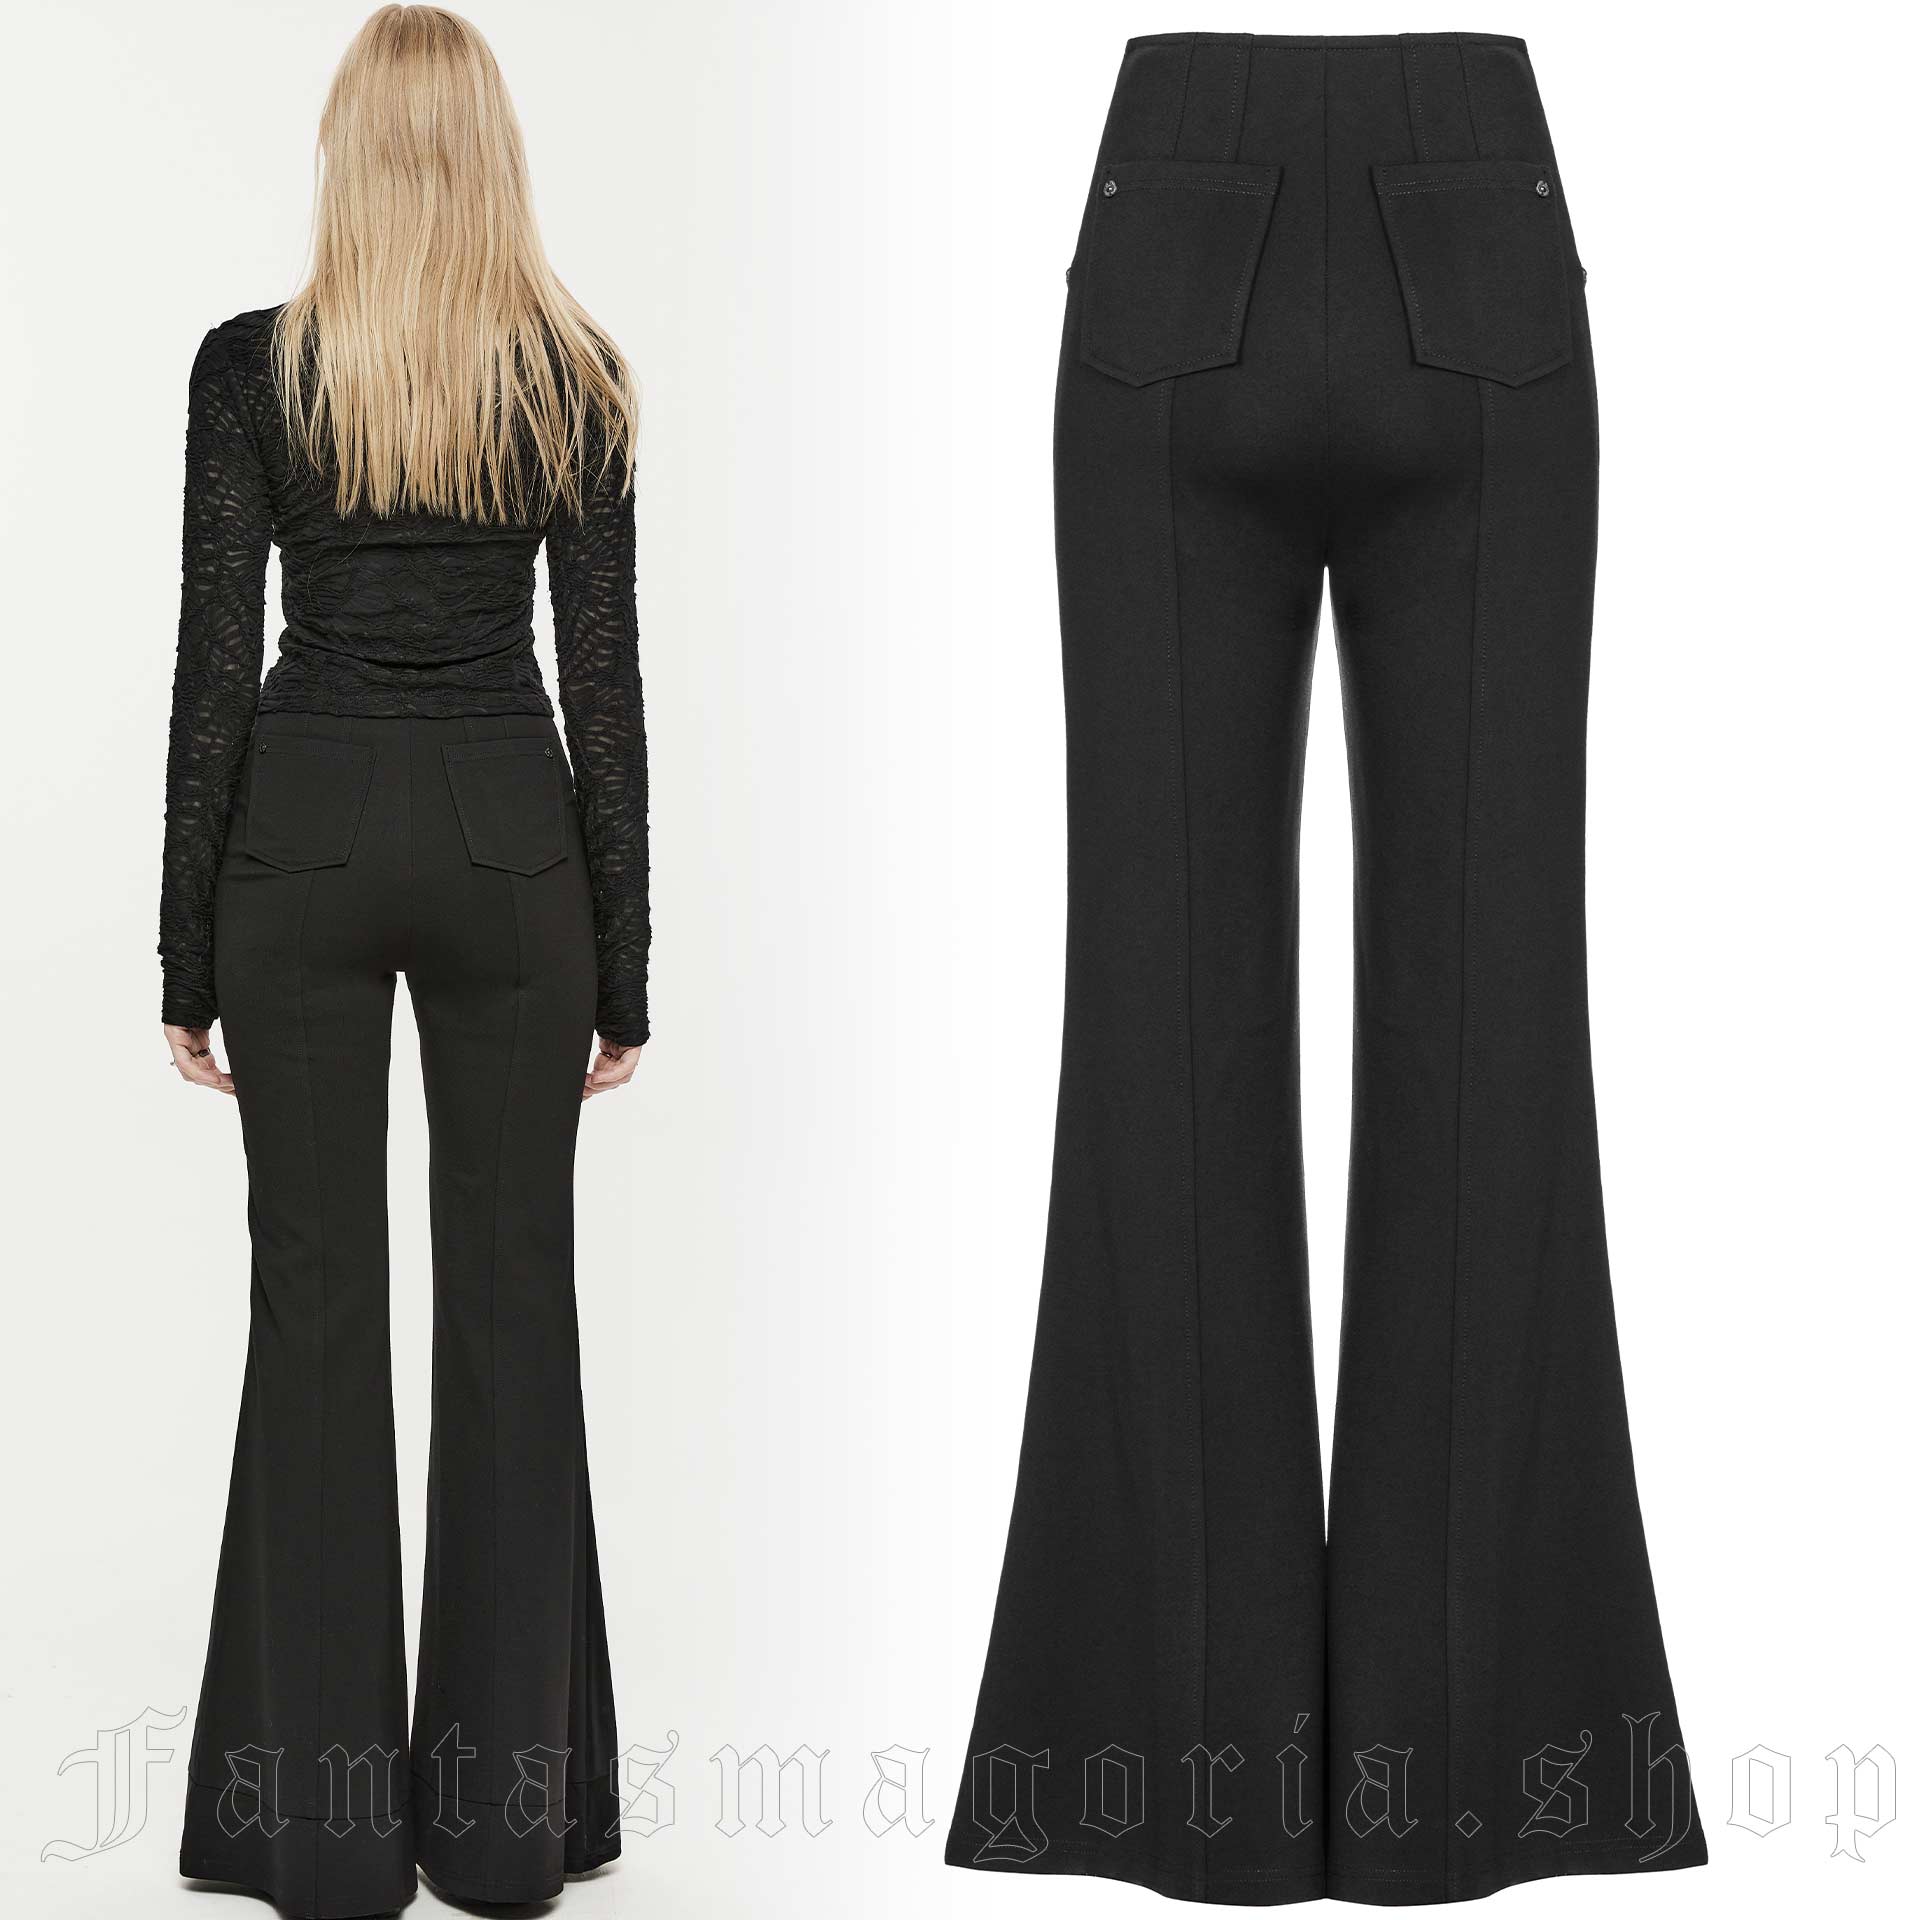 Hight Waist Bell Bottom Pants With Pockets. Goth Black Flare Pant